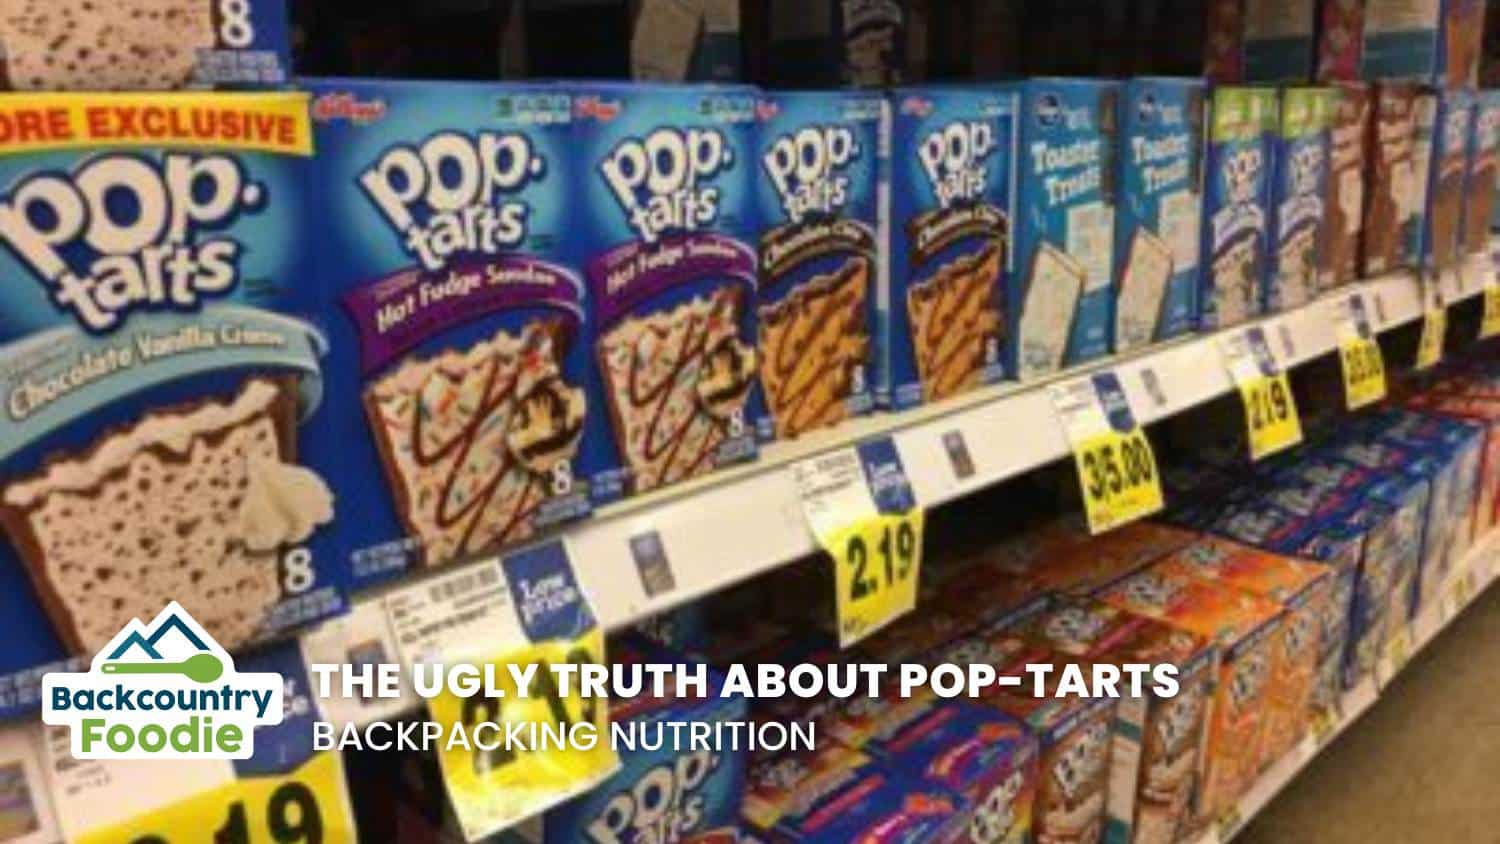 Backcountry Foodie Blog The Ugly Truth About Poptarts Backpacking Nutrition thumbnail